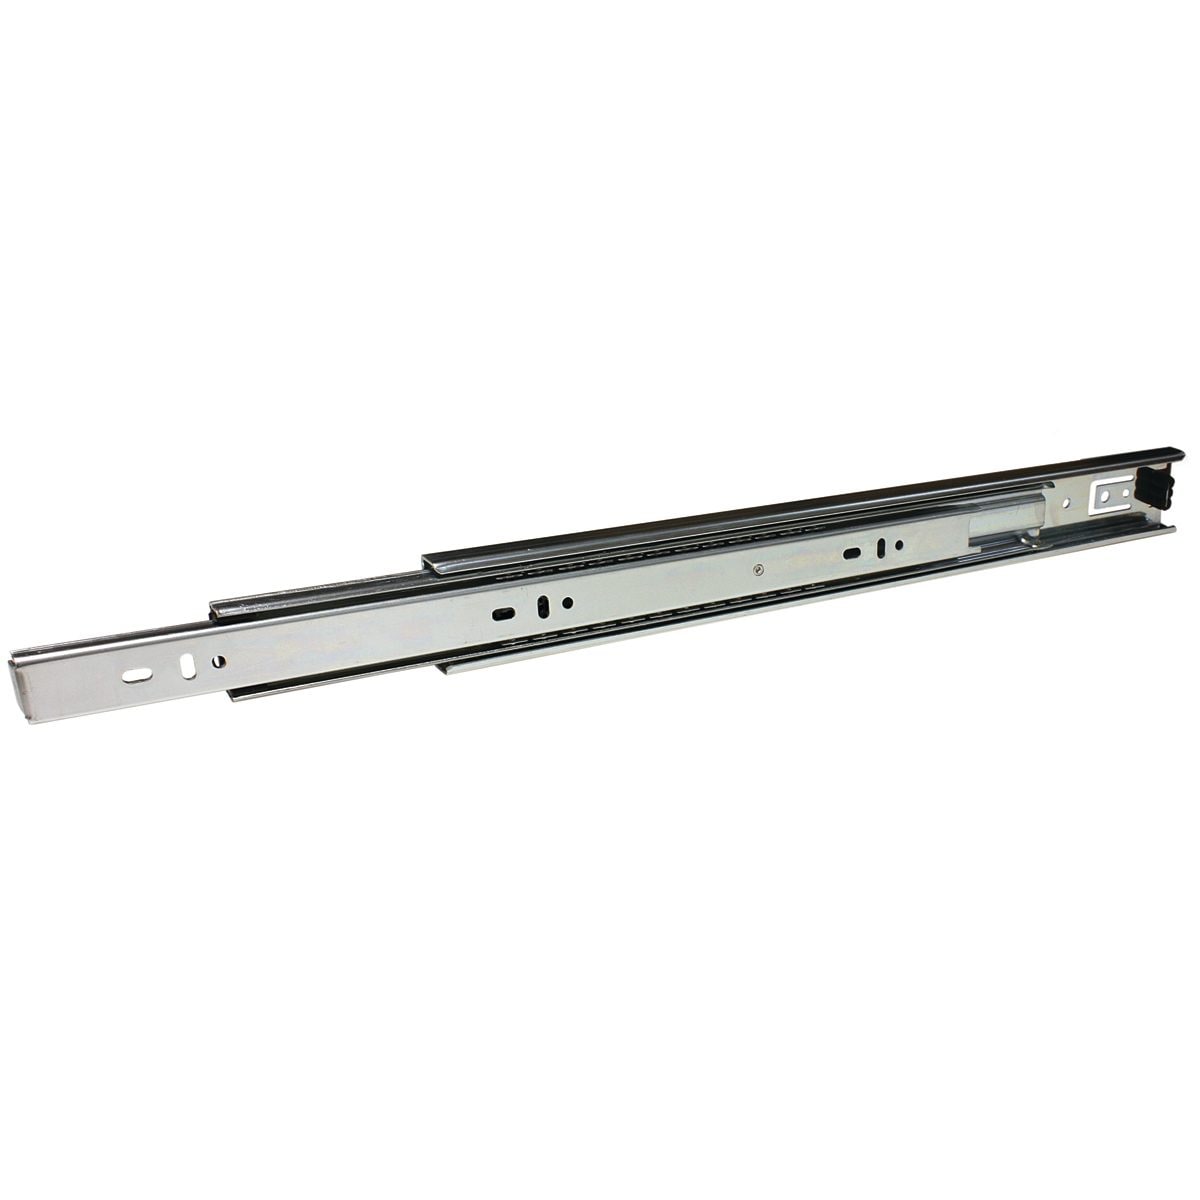 Cabinet Drawer Slides and Metal Drawer Box Systems